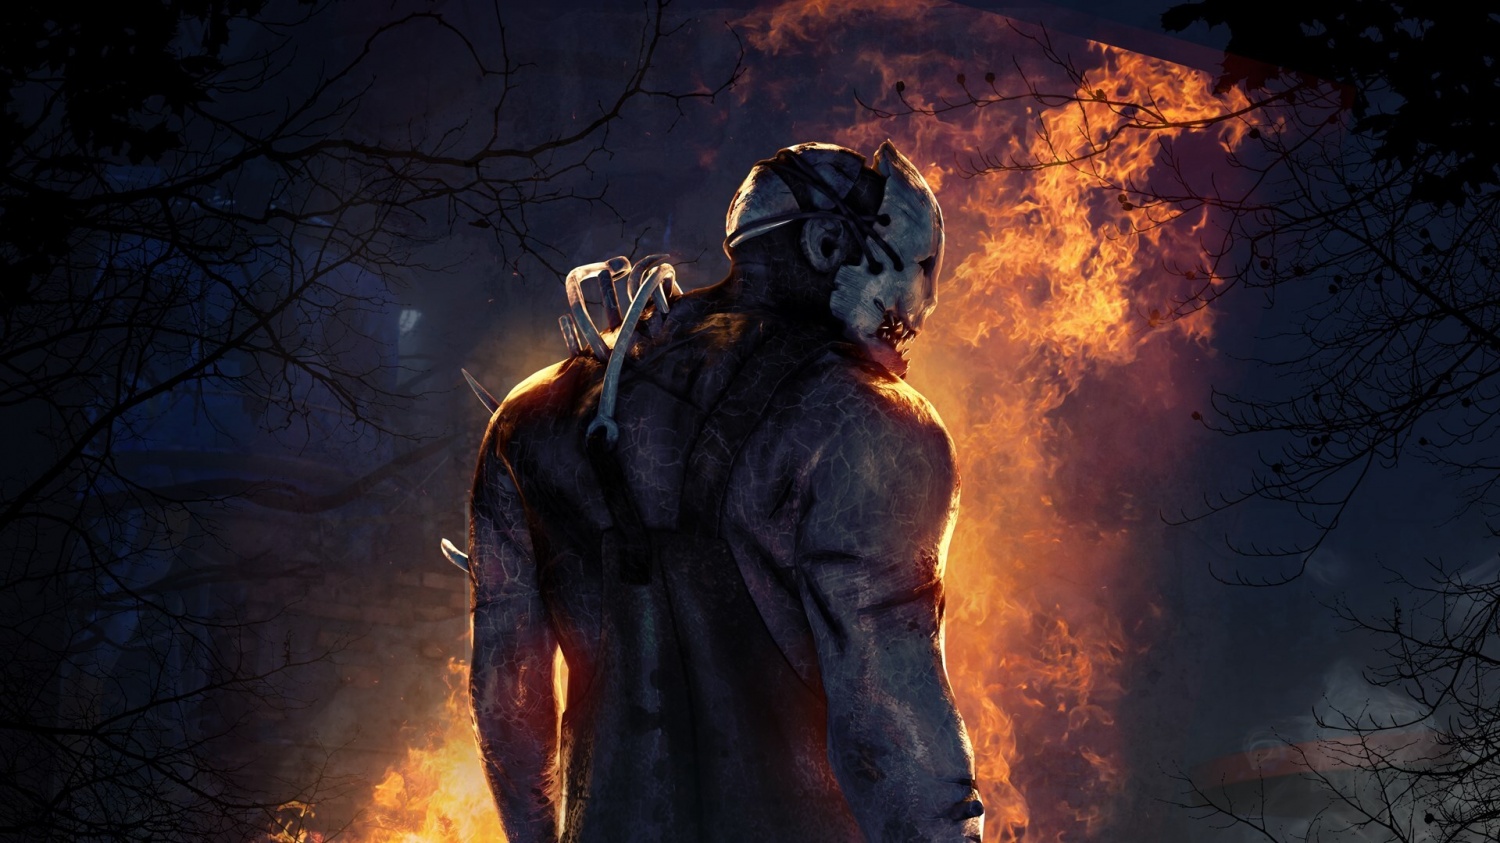 Dead by Daylight Devs Share One More Update On the Game's Newest Killer